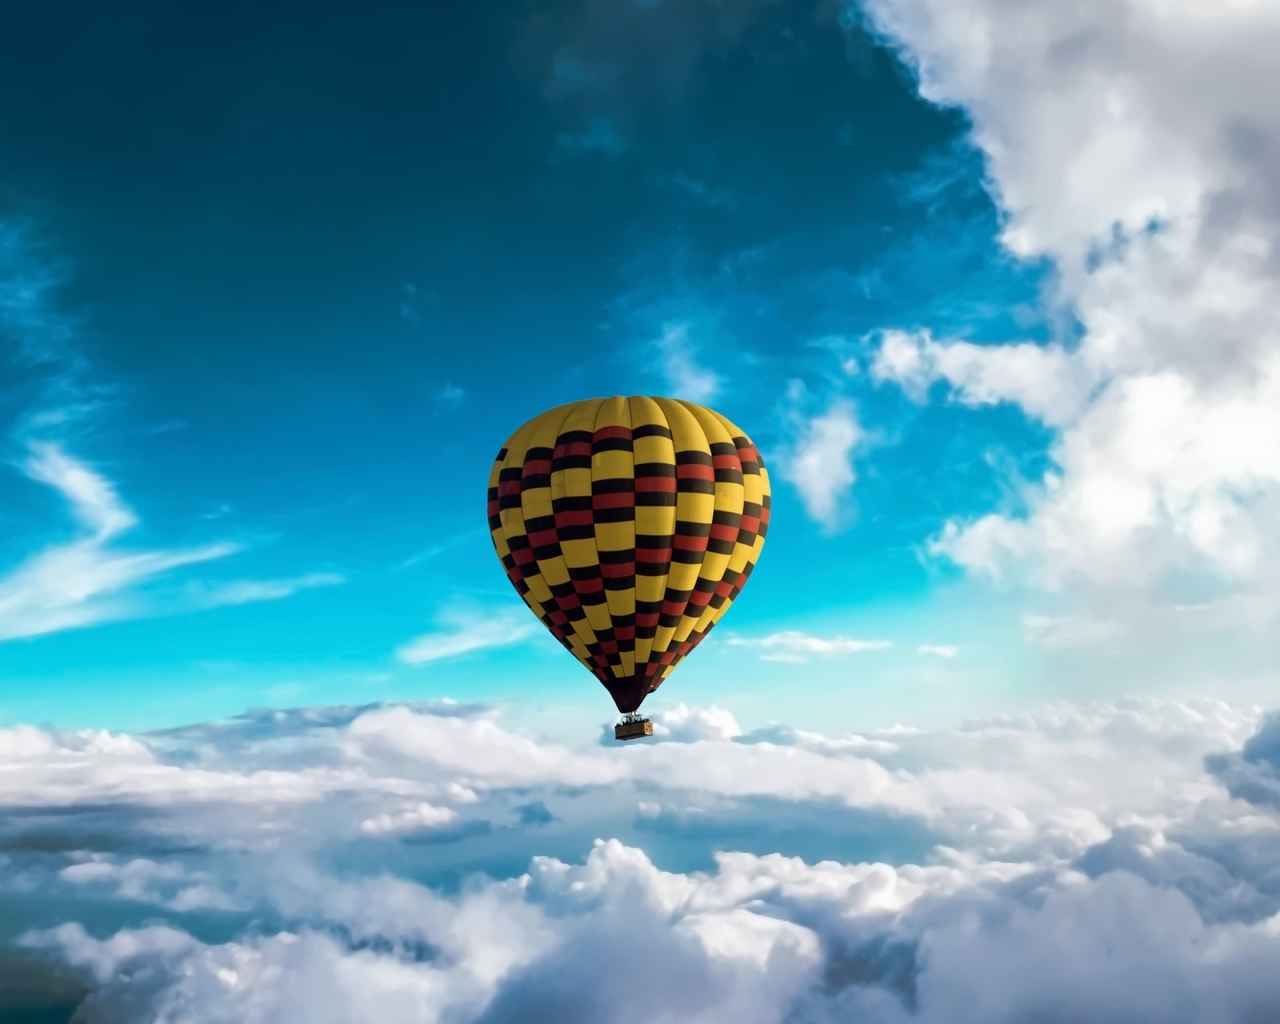 Image: Balloon, sky, clouds, flying, height